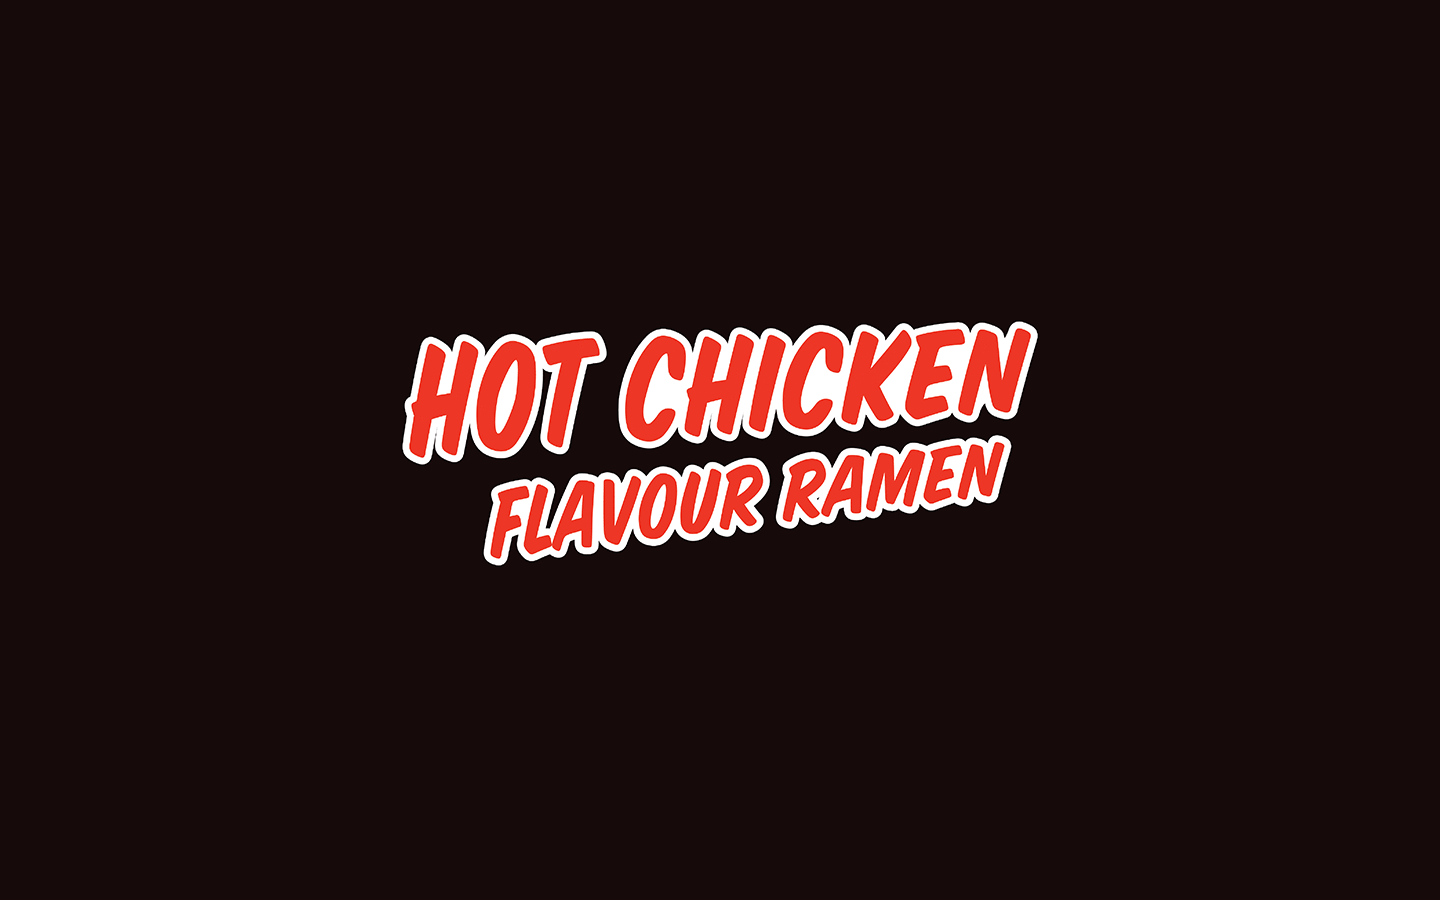 image of a redesigned logo for Samyang Chicken Flavour Ramen